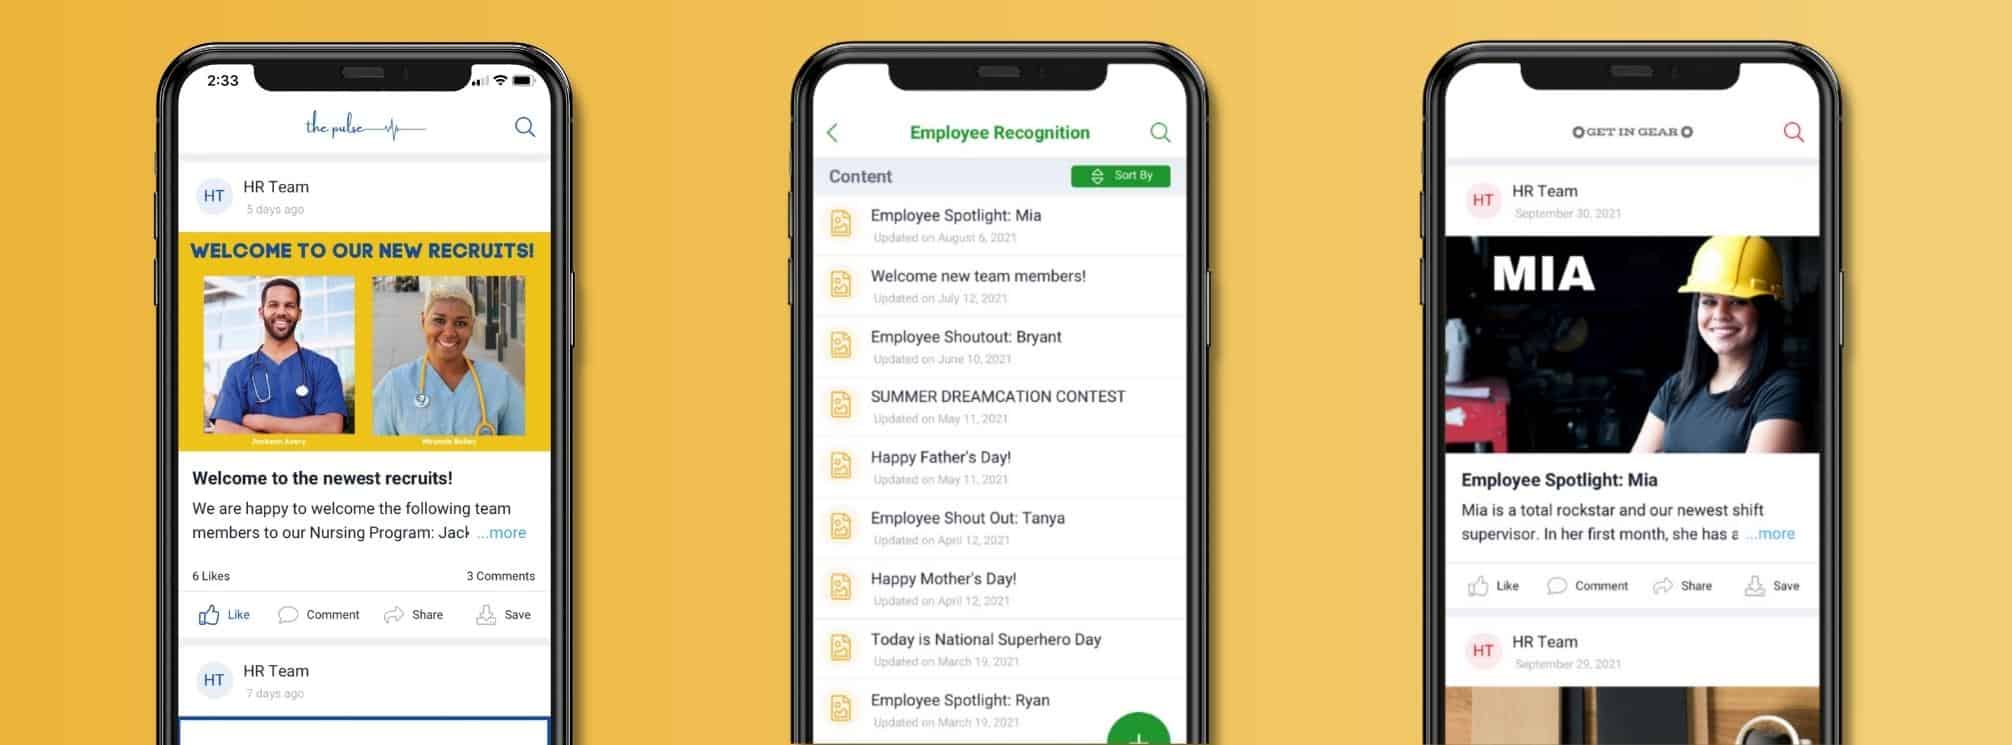 employee recognition posts on an employee app